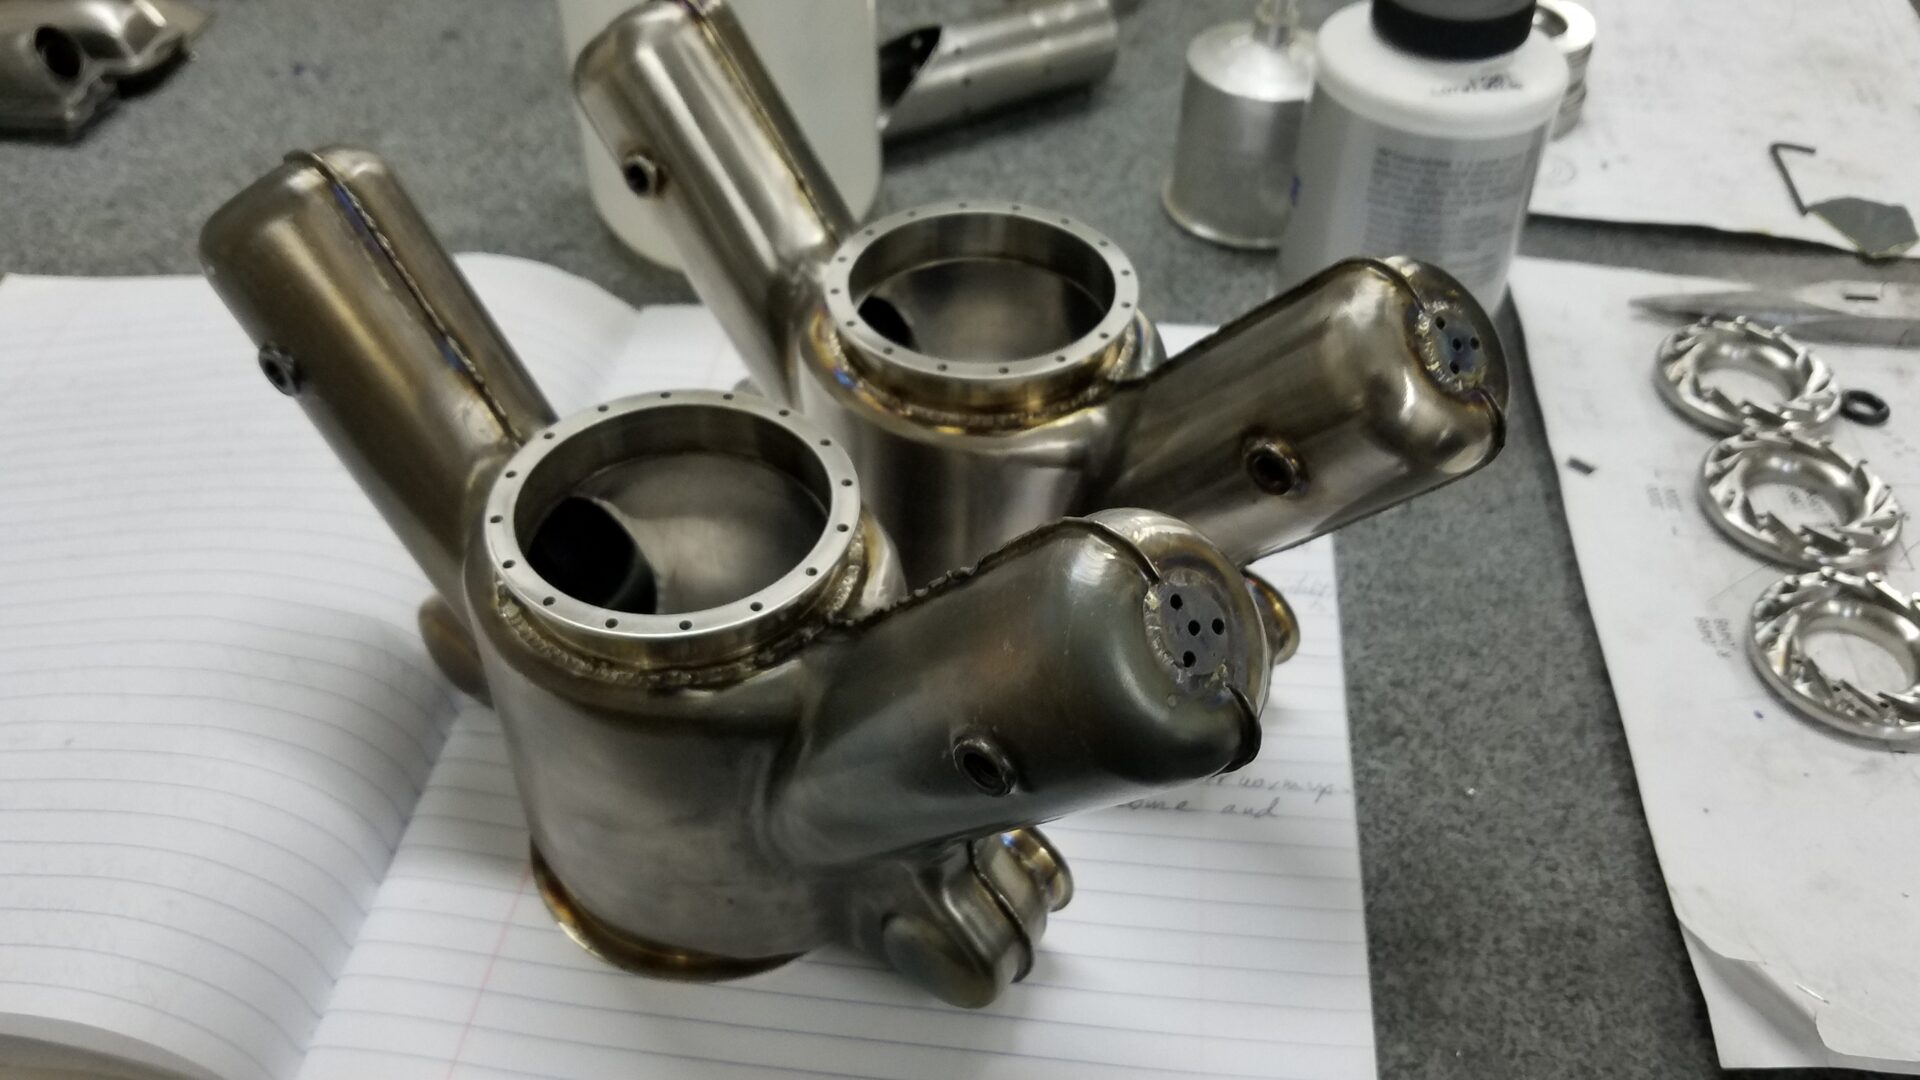 A group of metal parts sitting on top of paper.